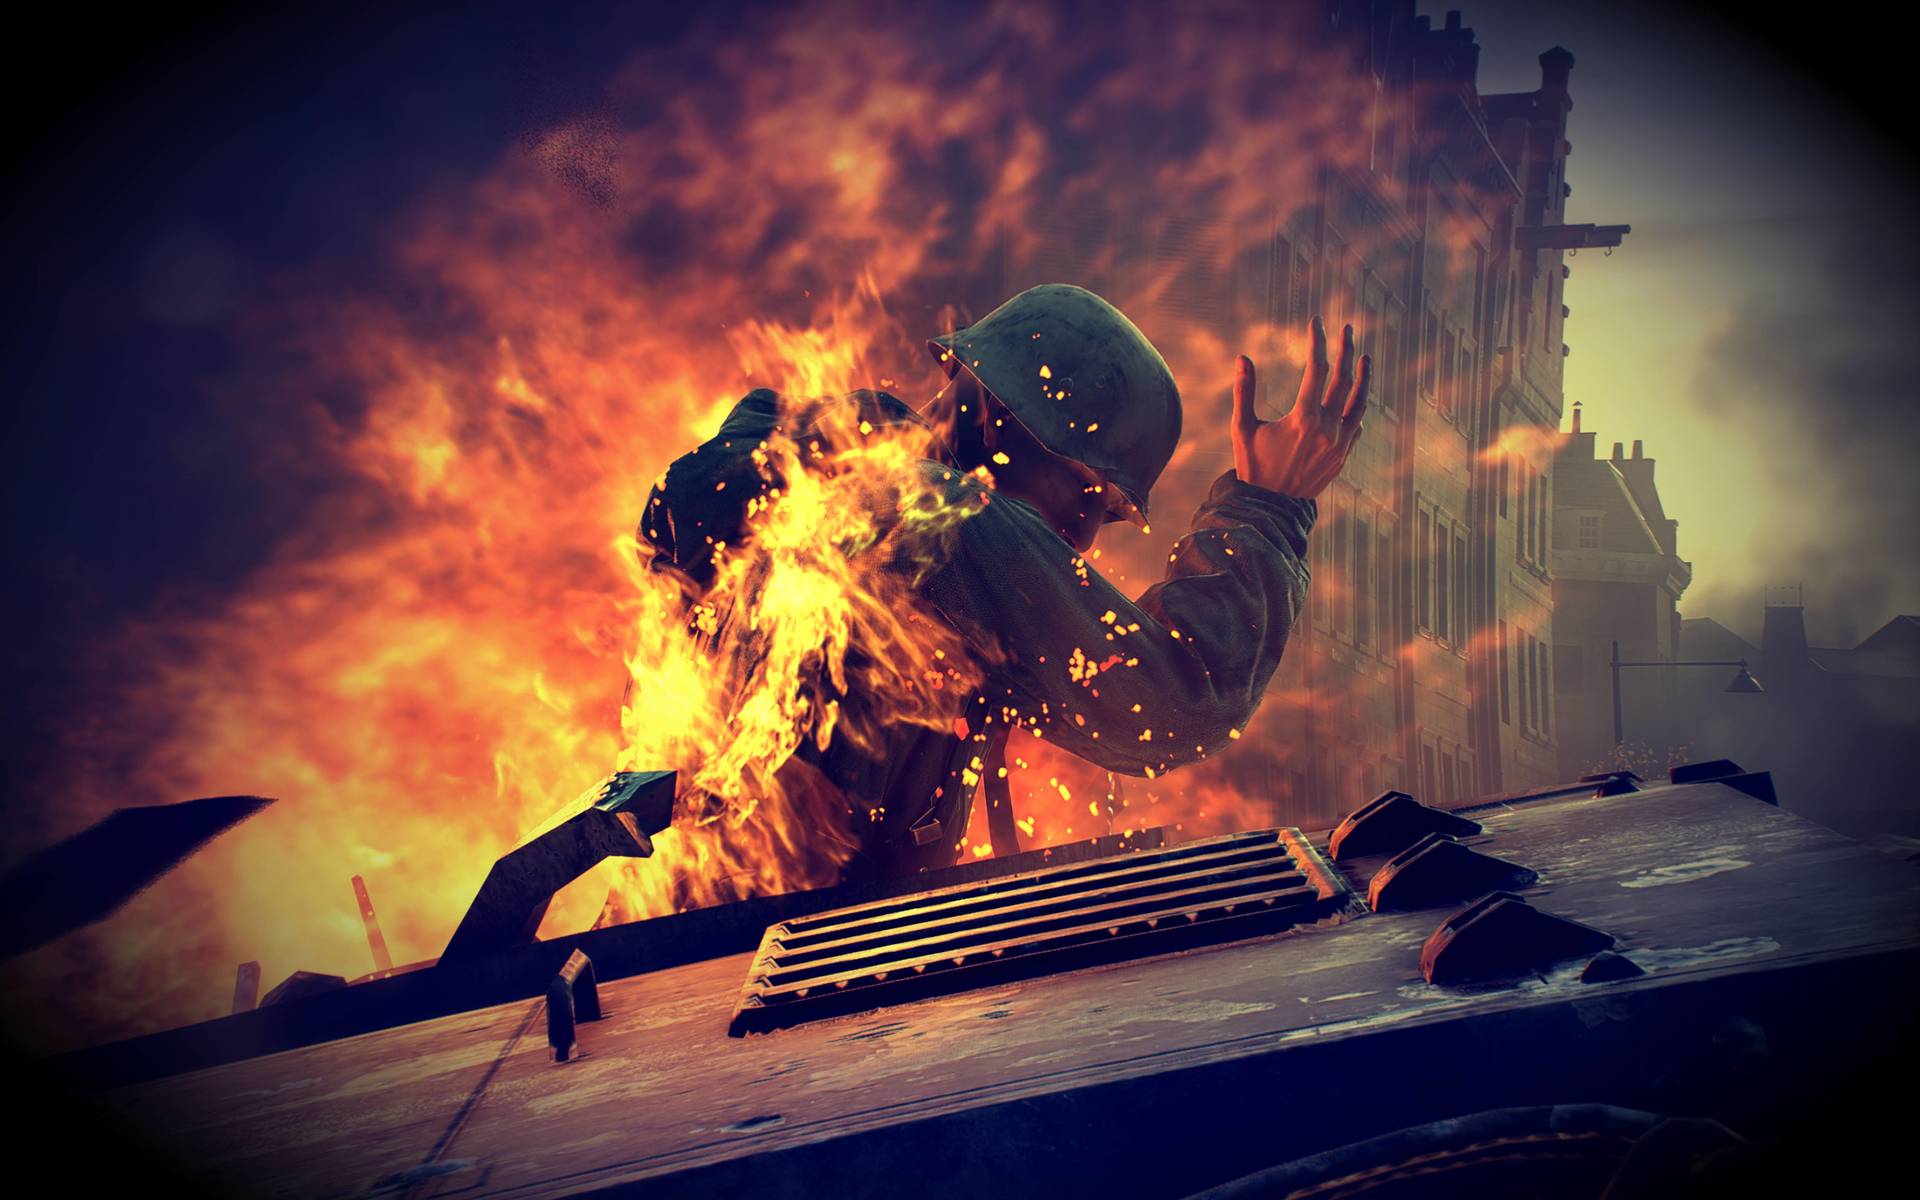 Battlefield 4: DICE Working to Fix Game Crashes and Freezing in Multiplayer